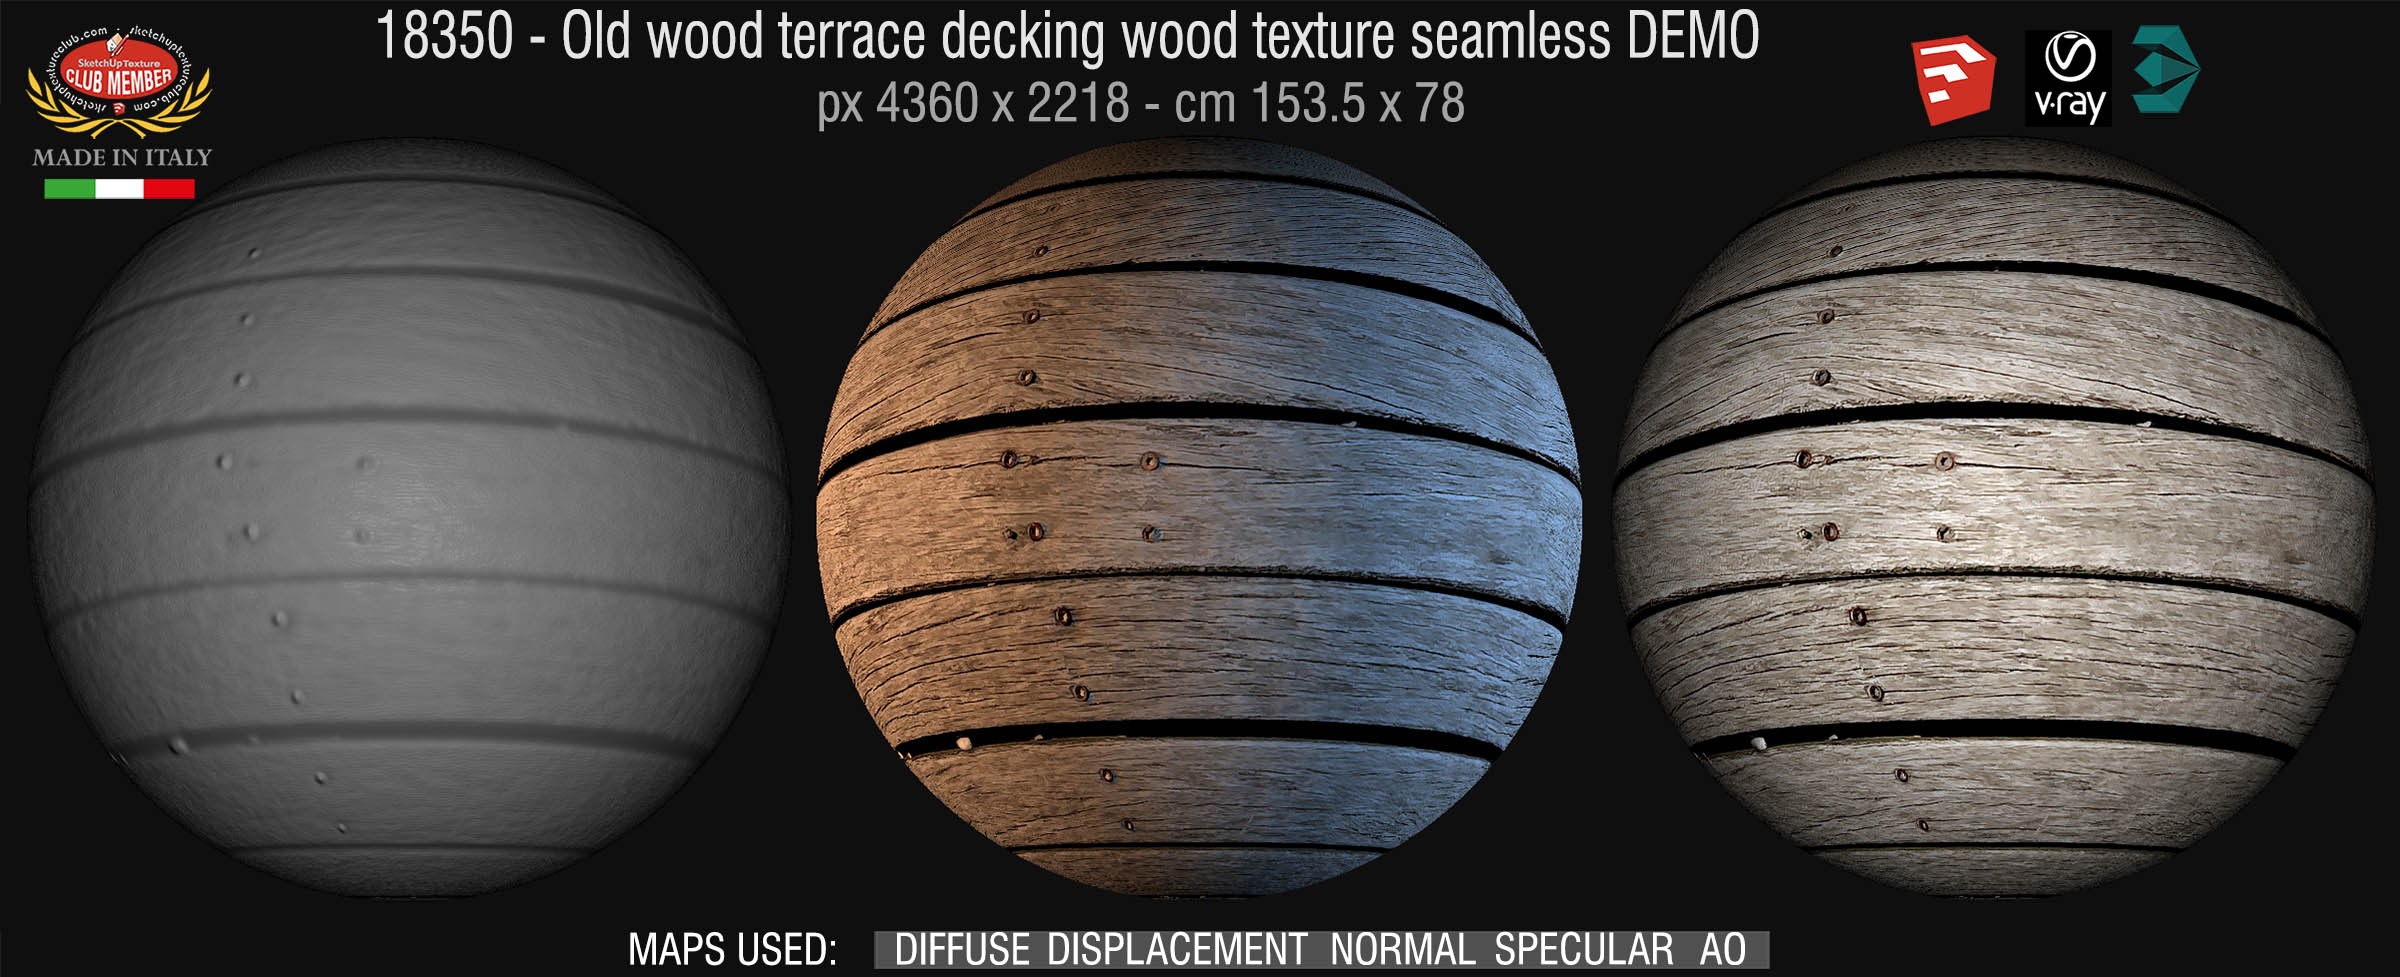 18350 - HR old wood terrace decking texture + maps DEMO